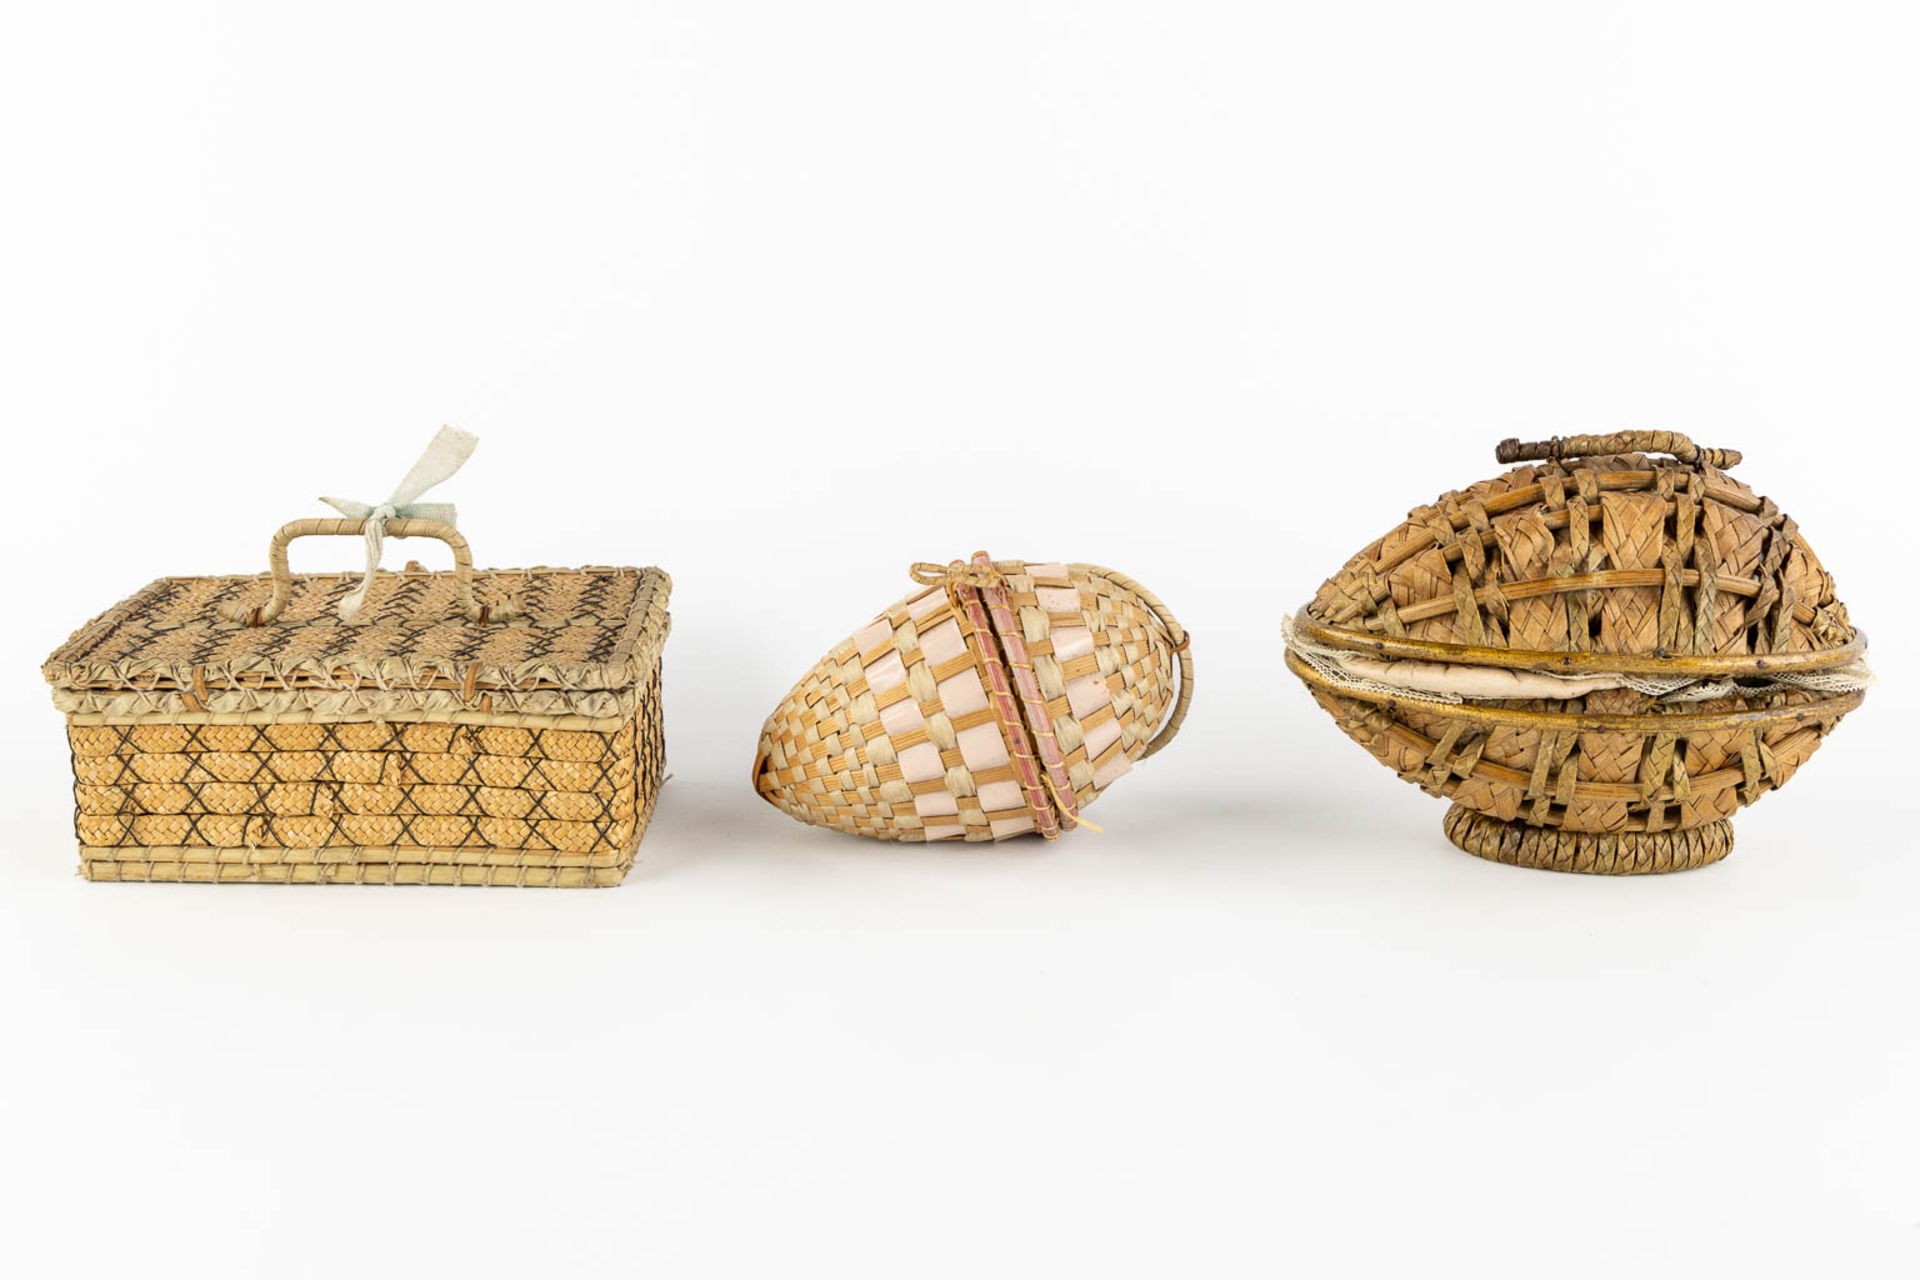 Three antique dolls, stored in a woven basket. (L:11,5 x W:17 x H:7 cm) - Image 5 of 13